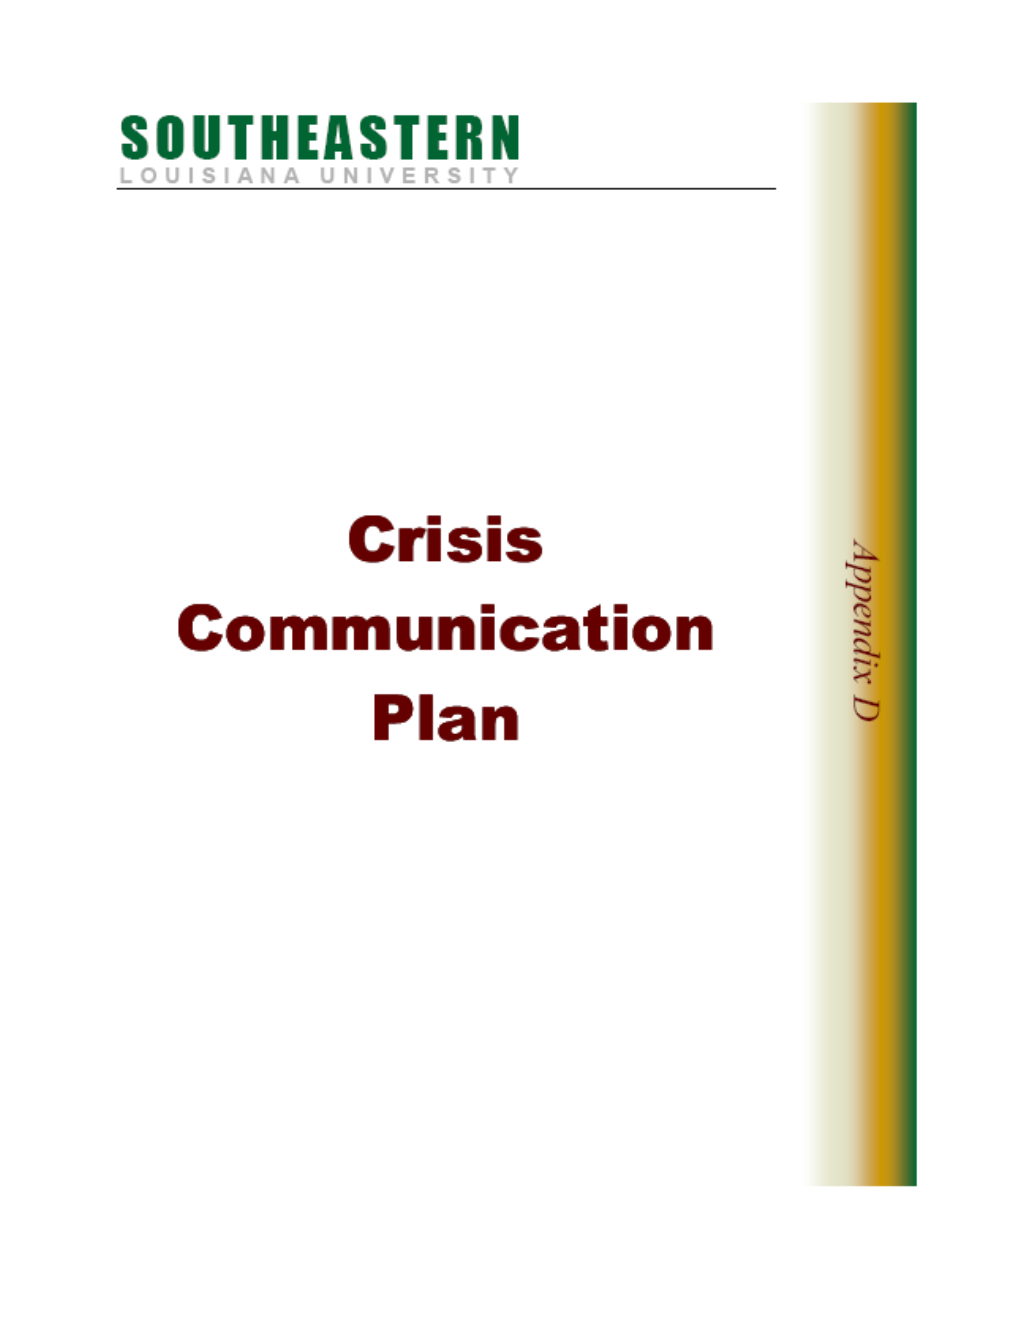 Crisis Communication Plan Should Be in Place